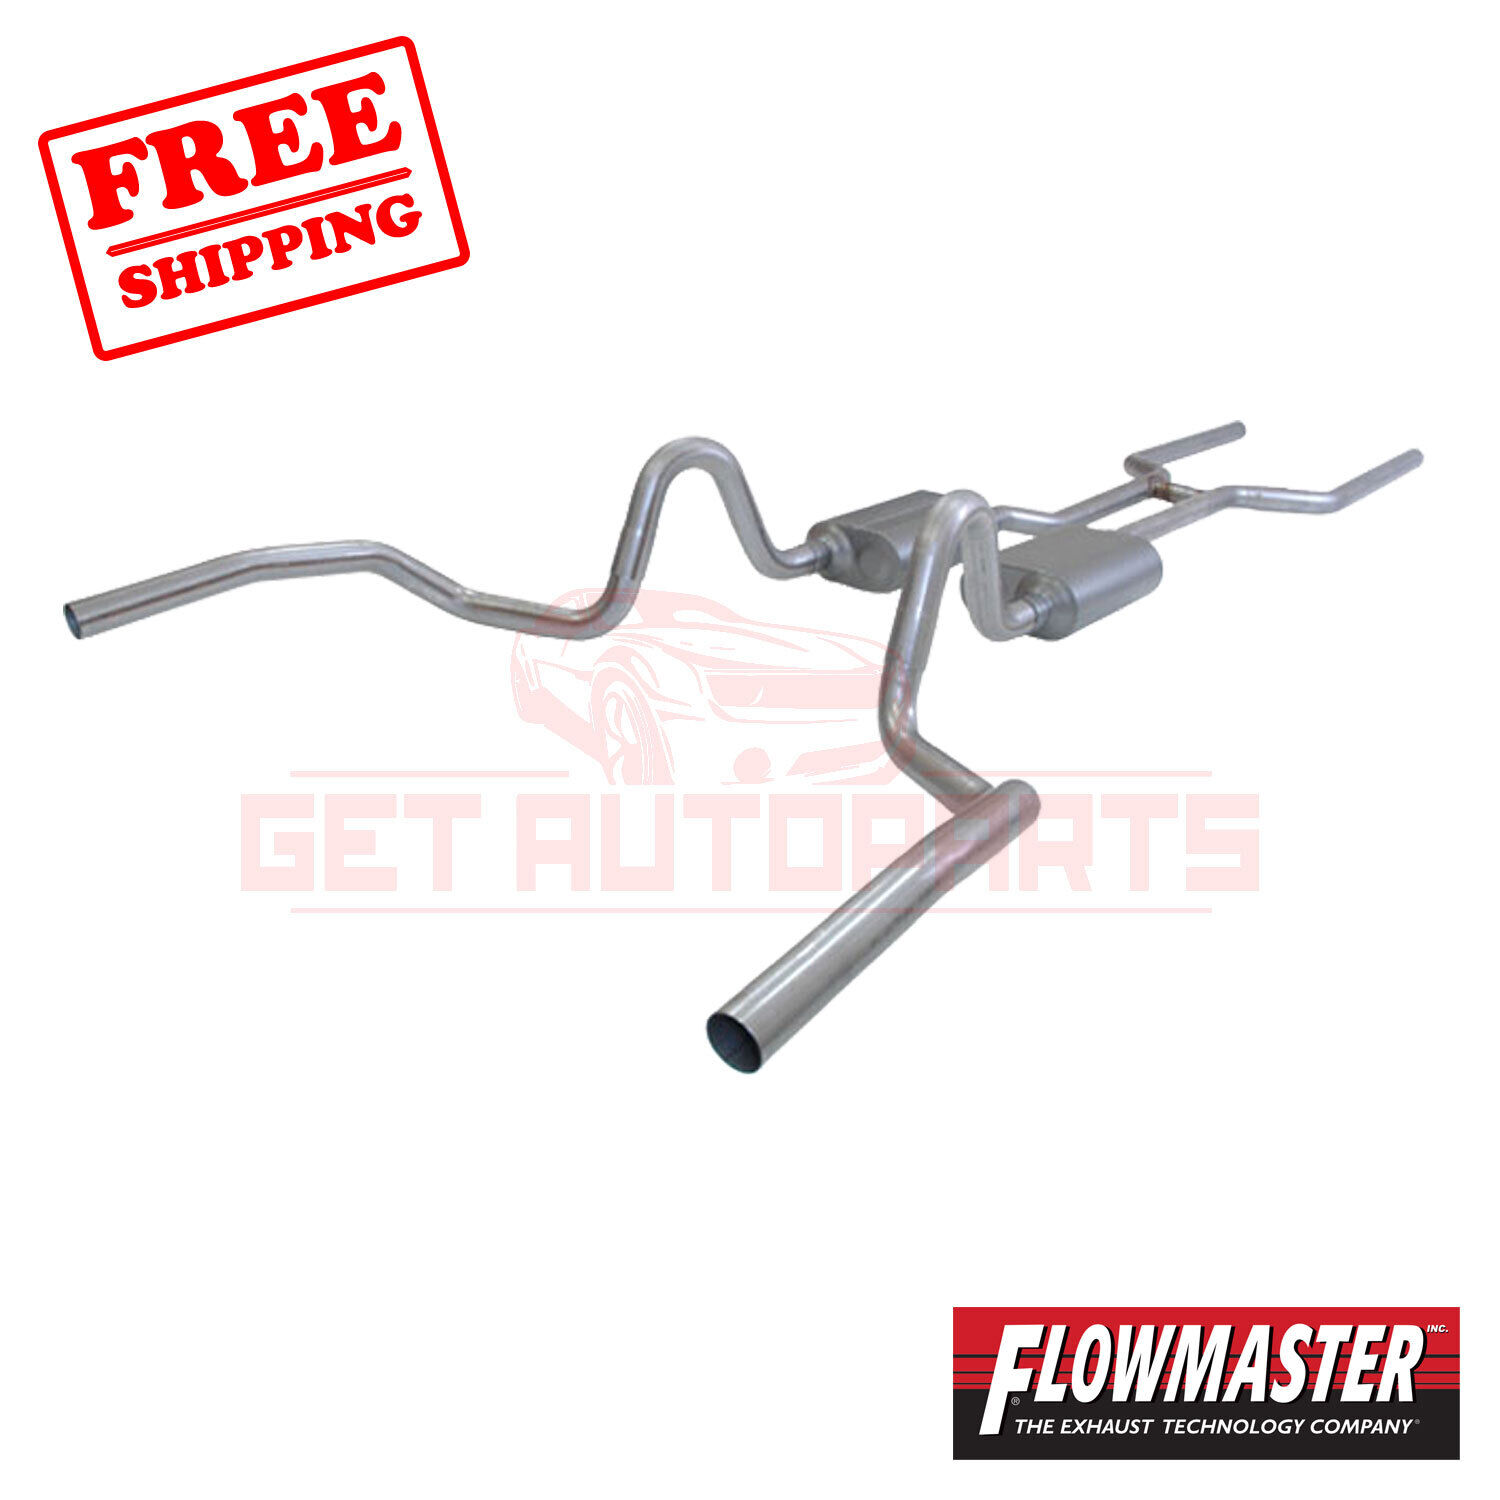 FlowMaster Exhaust System Kit for Buick GS 350 1968-1969